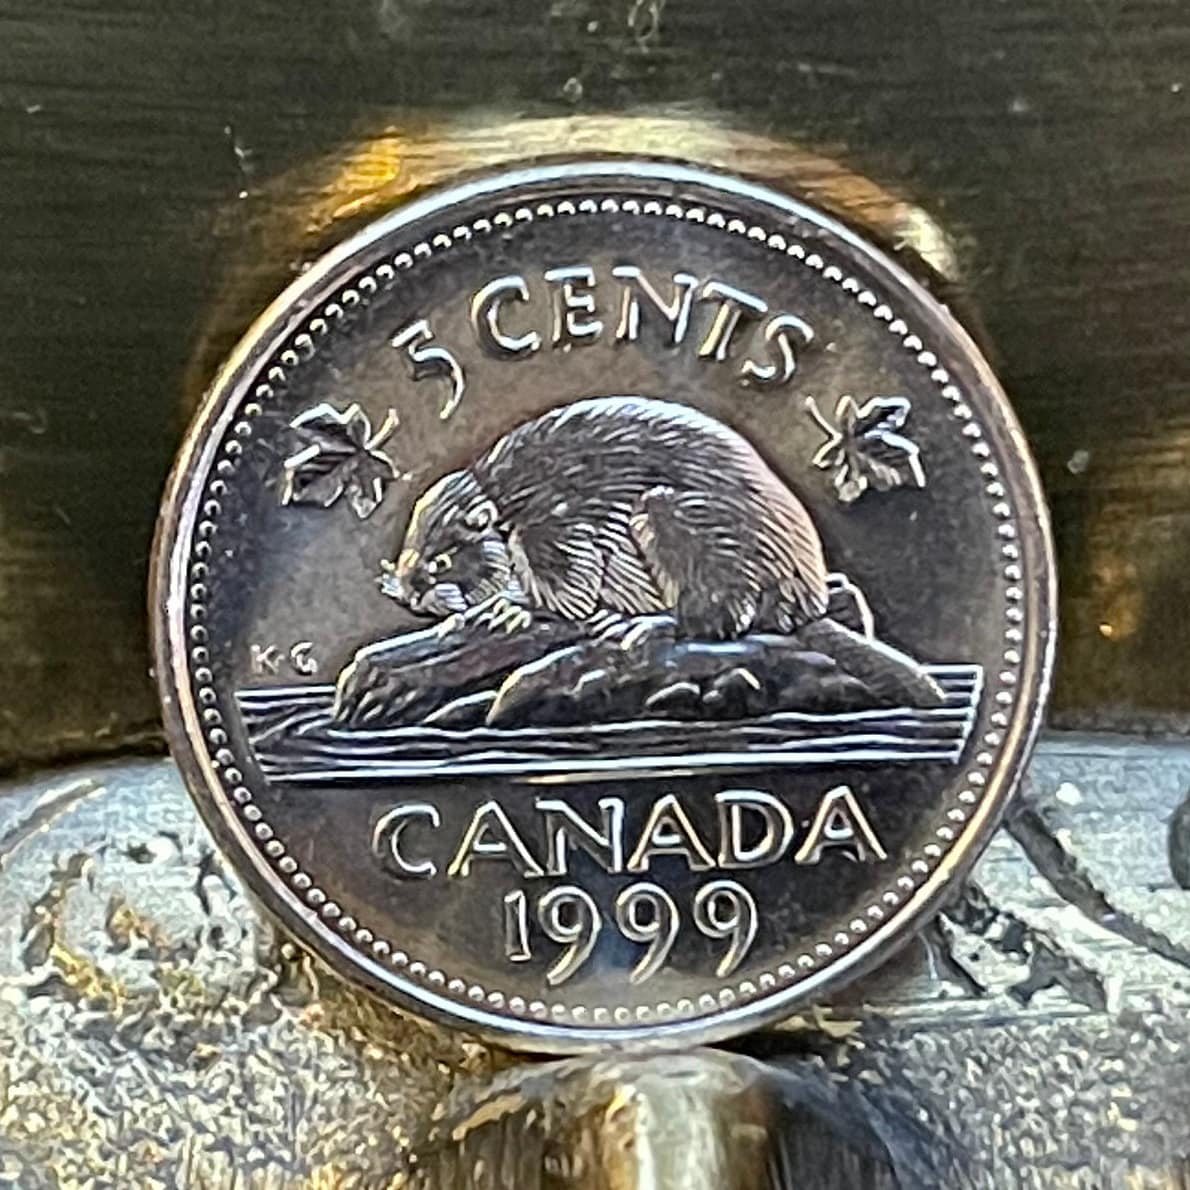 Beaver & Queen Elizabeth Canada 5 Cents Authentic Coin Money for Jewelry and Craft Making